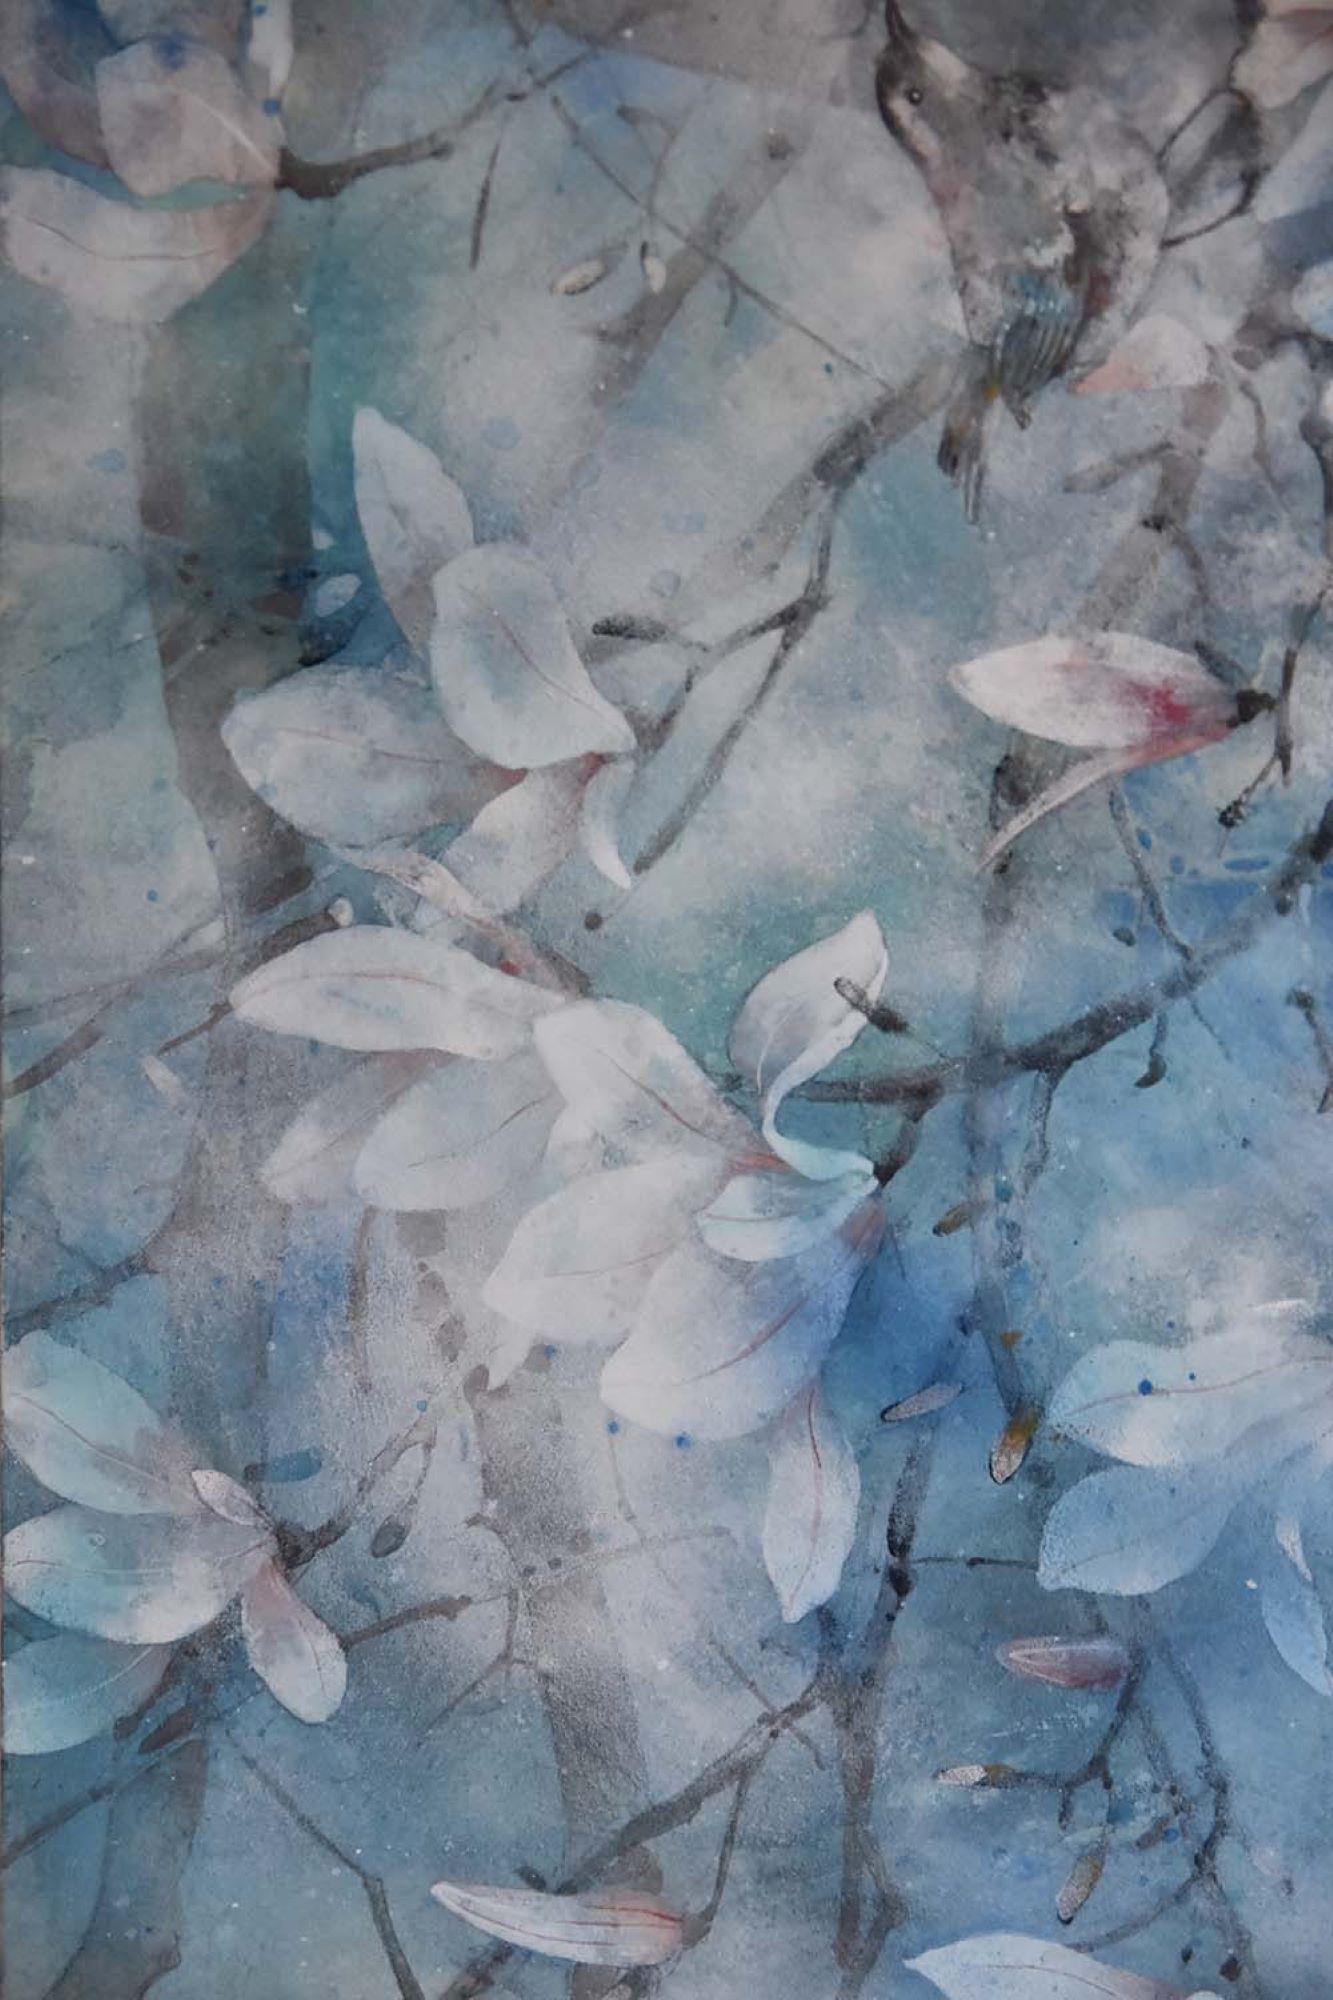 The spring wind is a unique painting by contemporary artist Chen Yiching. The painting is made with mineral pigments on Japanese paper mounted on wood, dimensions are 70 × 100 cm (27.6 × 39.4 in). Dimensions of the framed (white shadow box) artwork